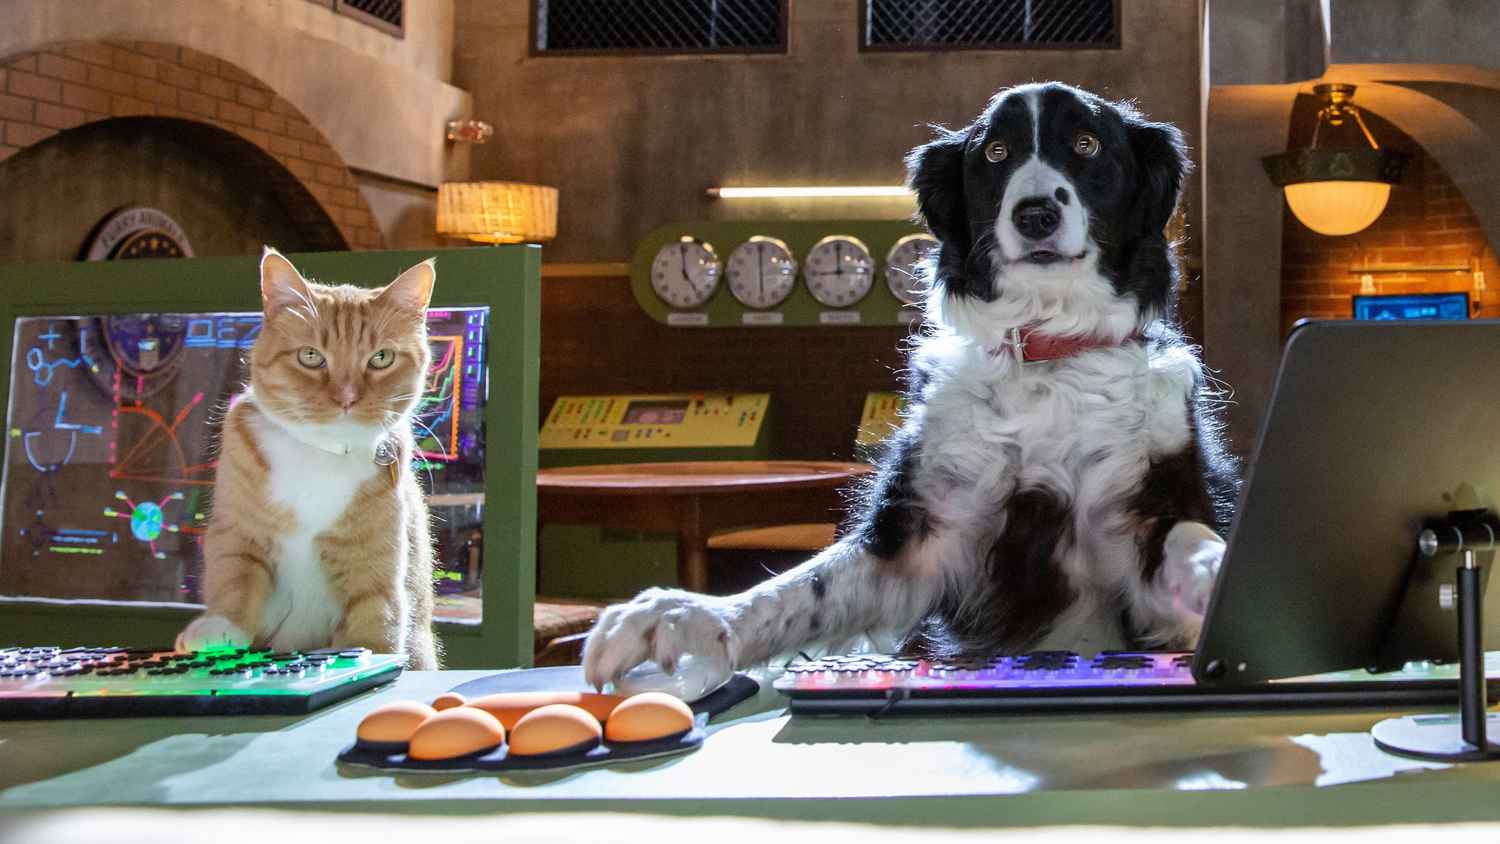 Cats Dogs 3 Paws Unite 2020 Trailer Family Comedy Movie Youtube